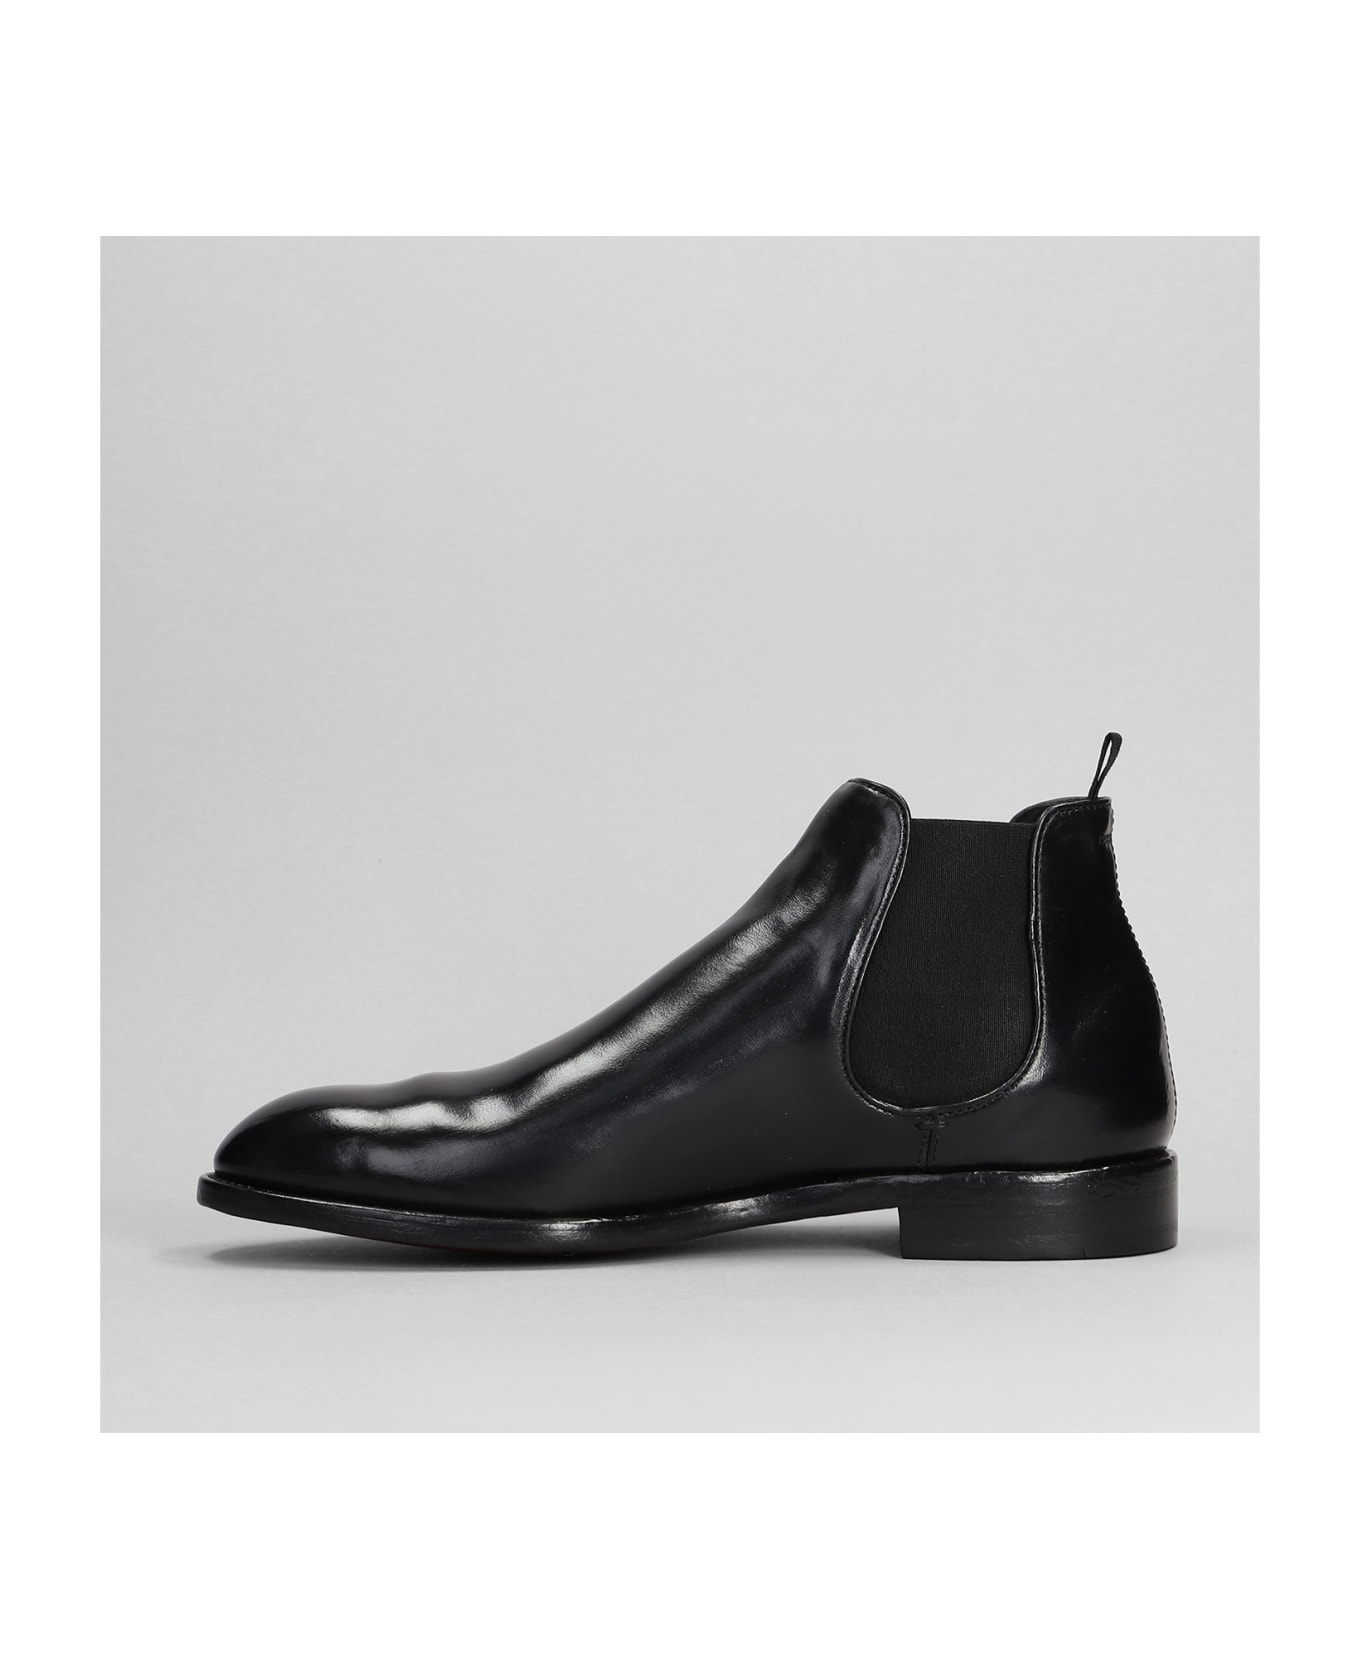 Officine Creative Signature 002 Ankle Boots In Black Leather - black